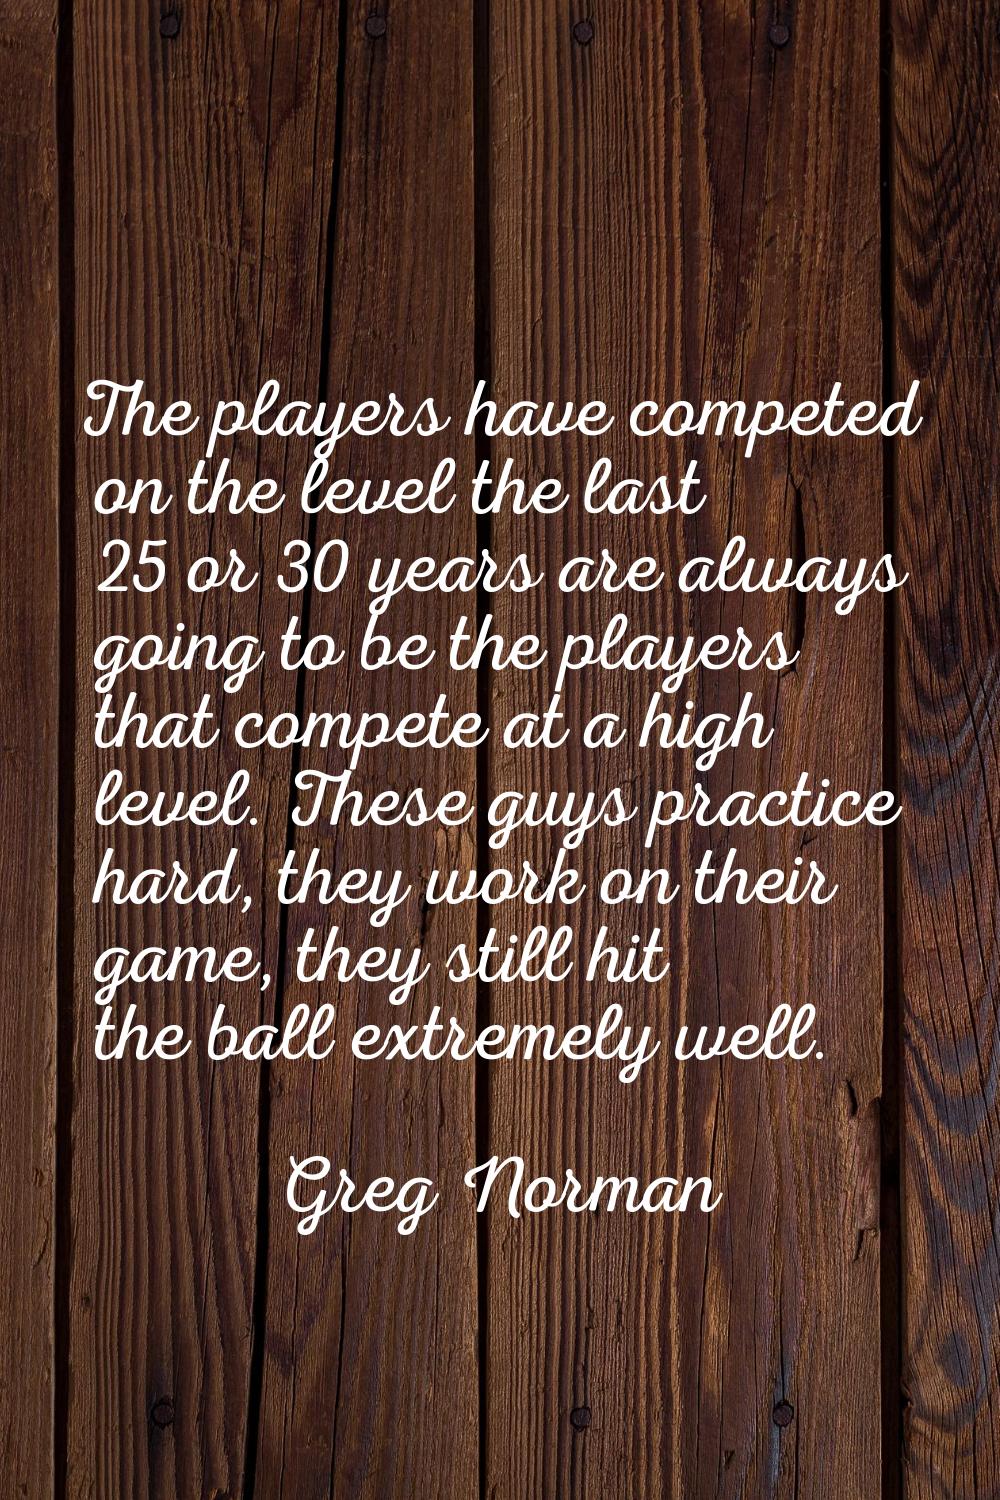 The players have competed on the level the last 25 or 30 years are always going to be the players t